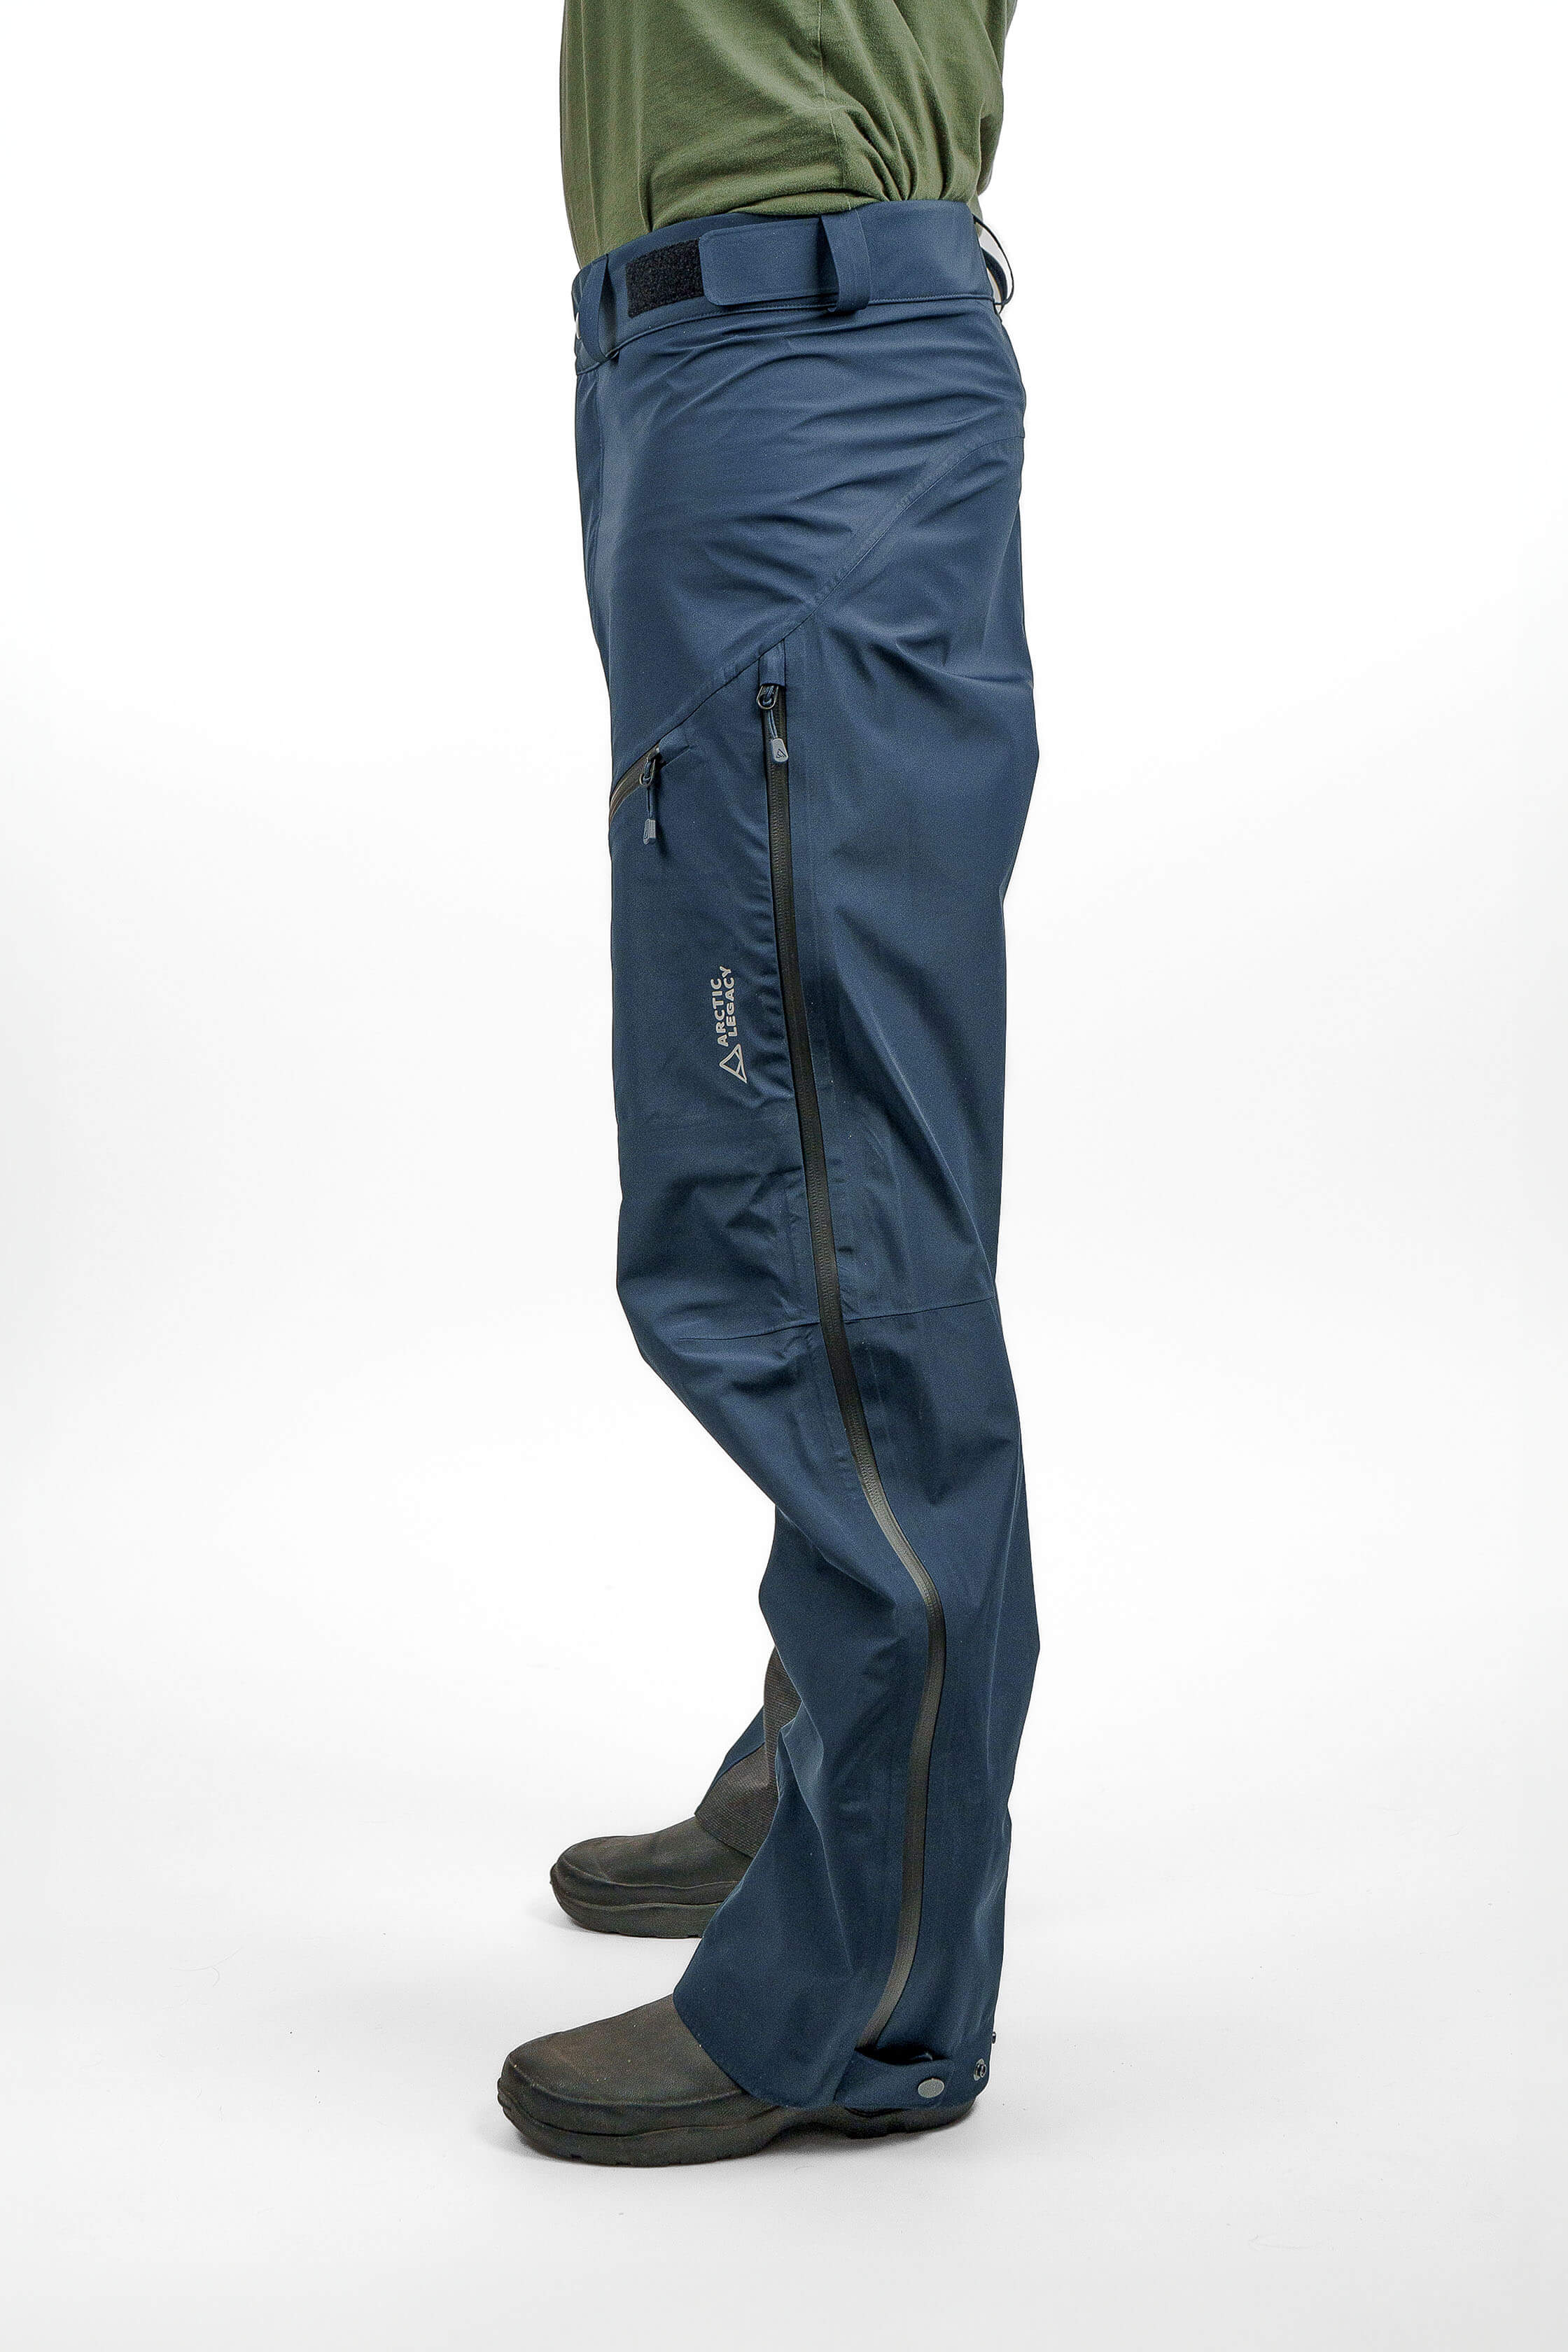 Blue hardshell pants in unisex sizing - side view of the Arctic Legacy Nuka Elements 3 layer Pants#color_total-eclipse